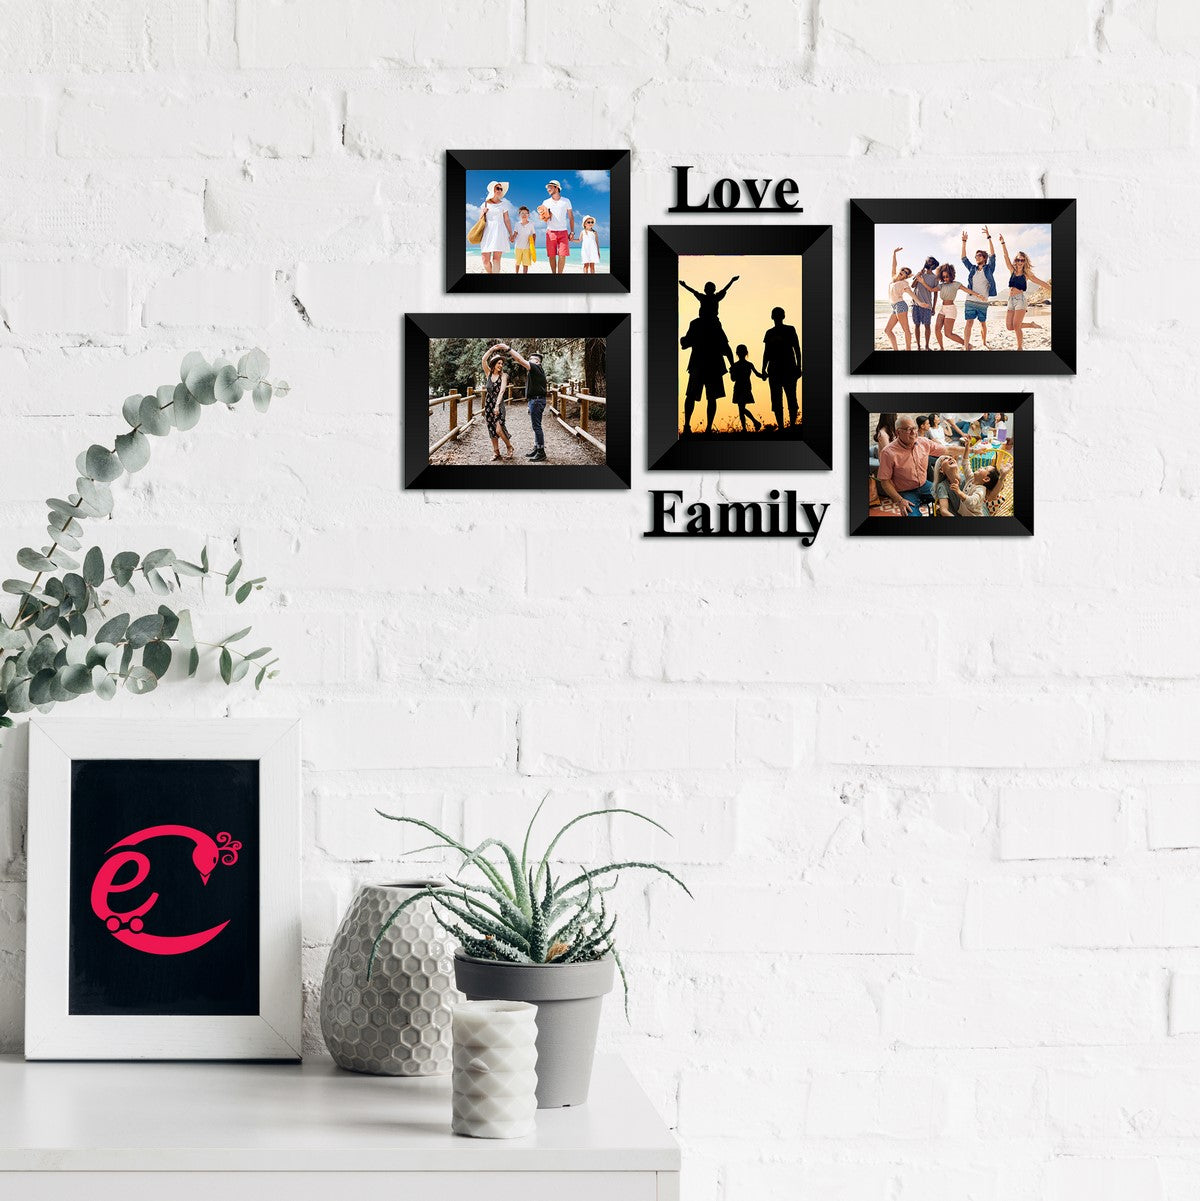 Memory Wall Collage Photo Frame - Set of 5 Photo Frames for 2 Photos of 4"x6", 3 Photos of 5"x7", 1 Piece of LOVE, 1 Piece of FAMILY 1